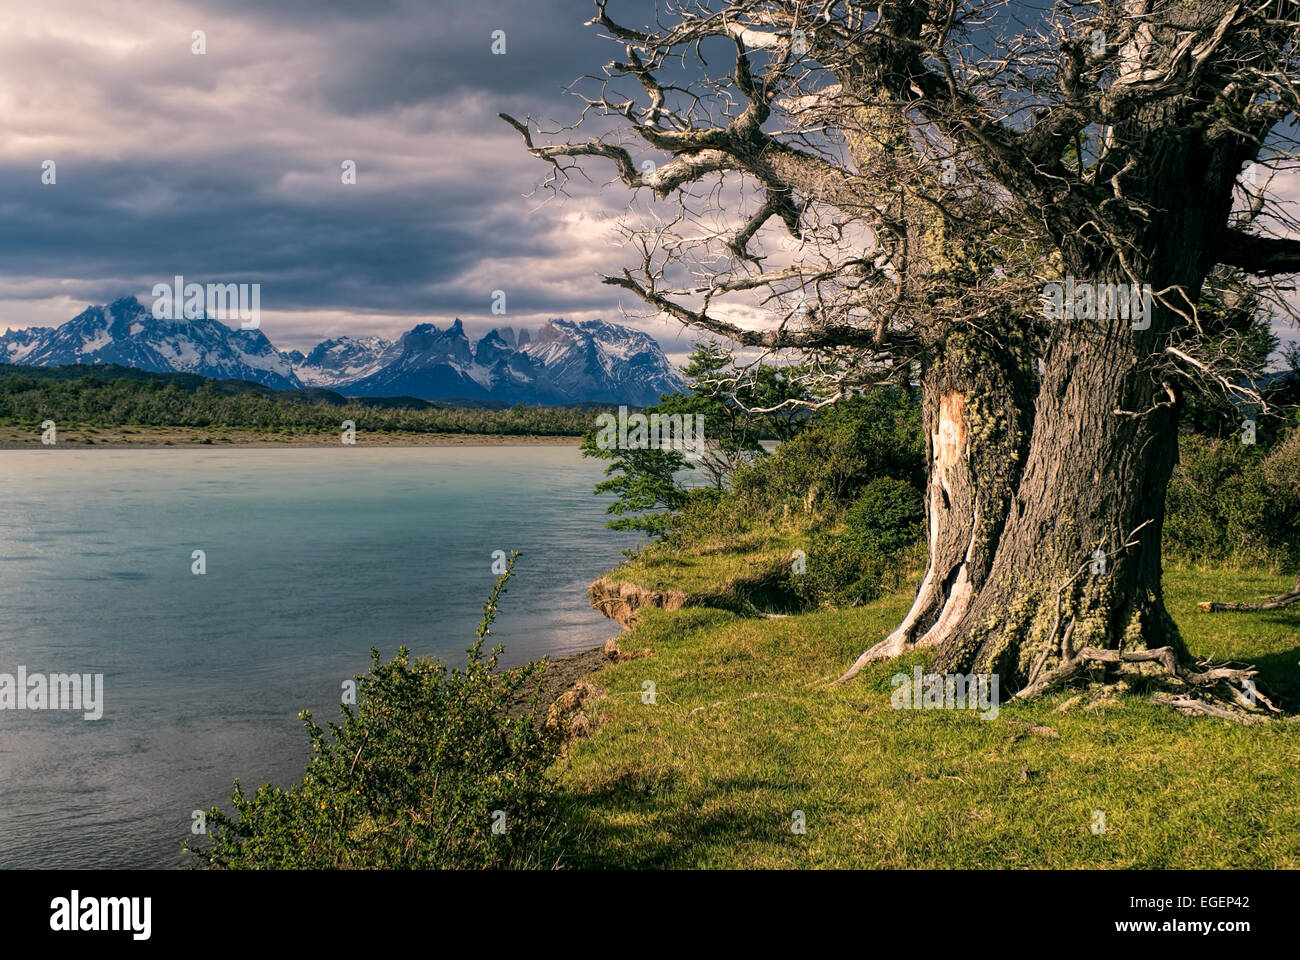 National park in Chile, Torres del Paine Stock Photo